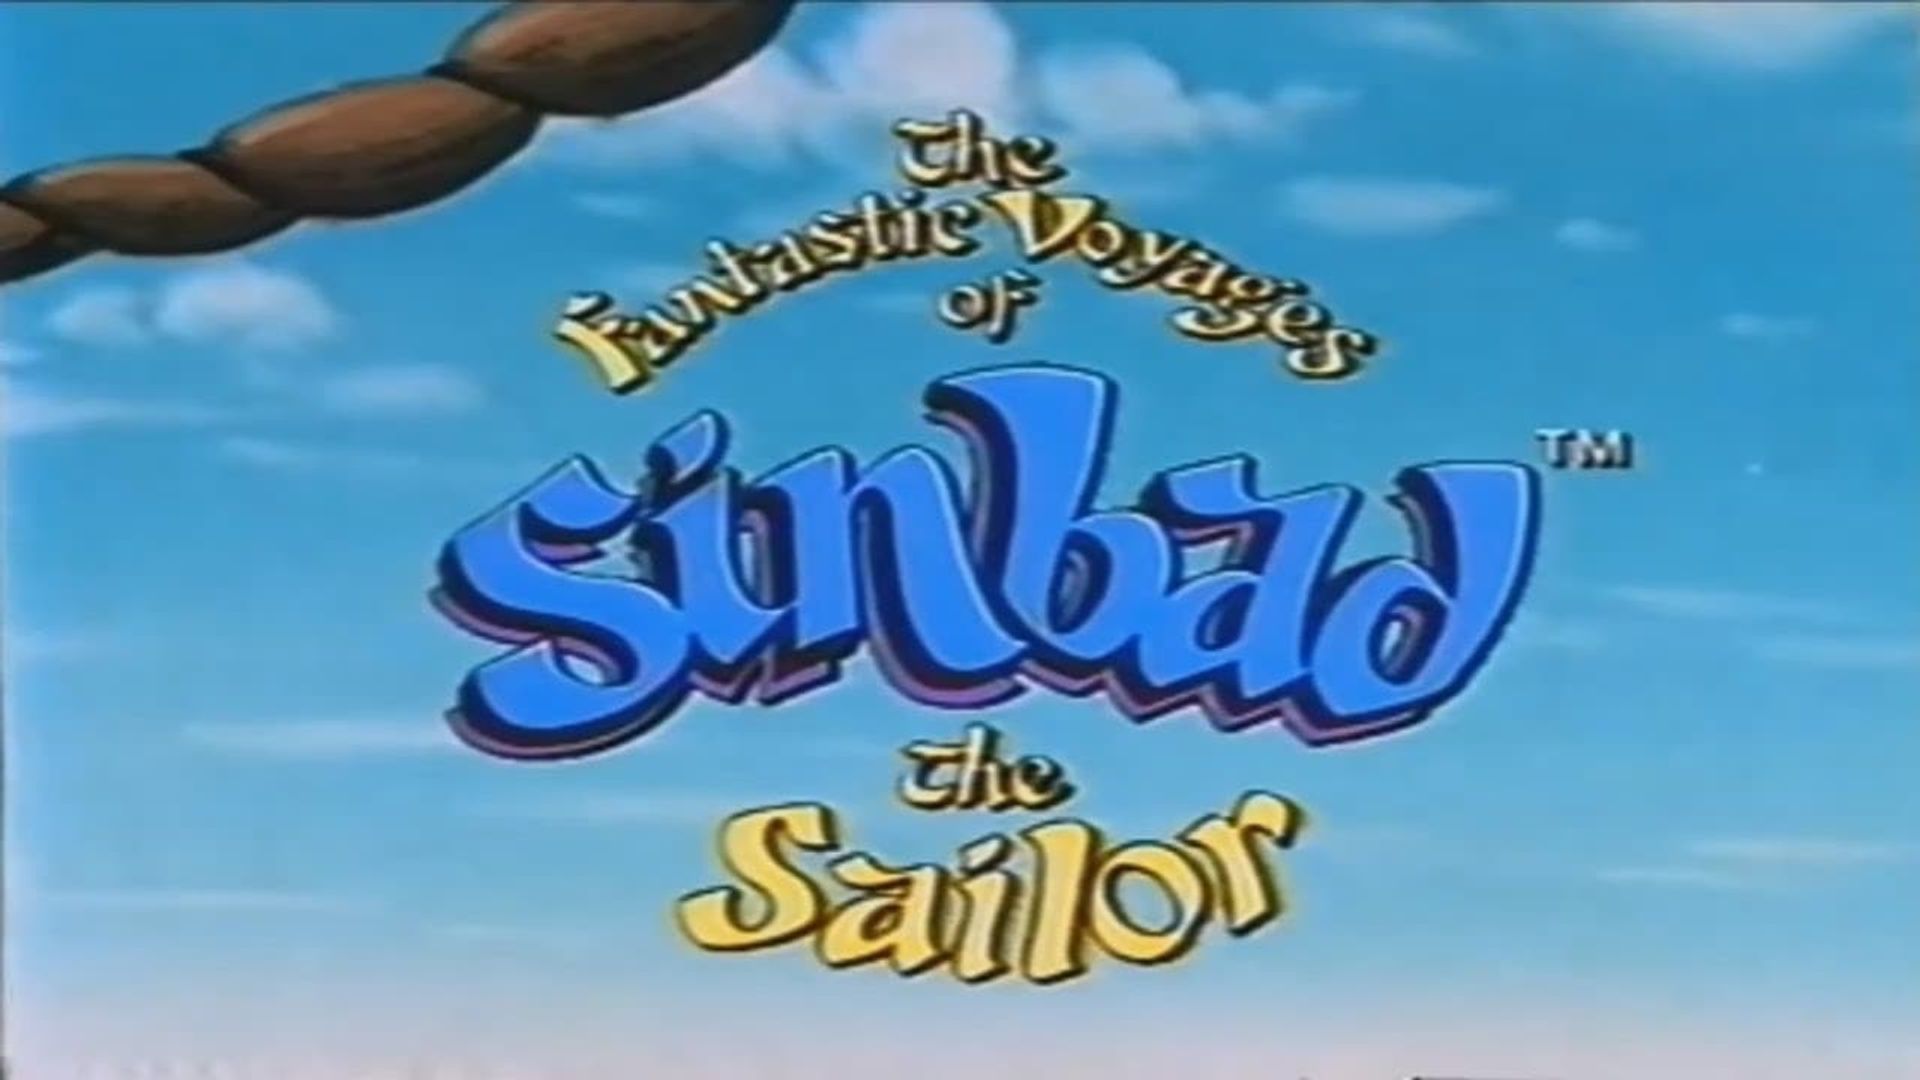 The Fantastic Voyages of Sinbad the Sailor background